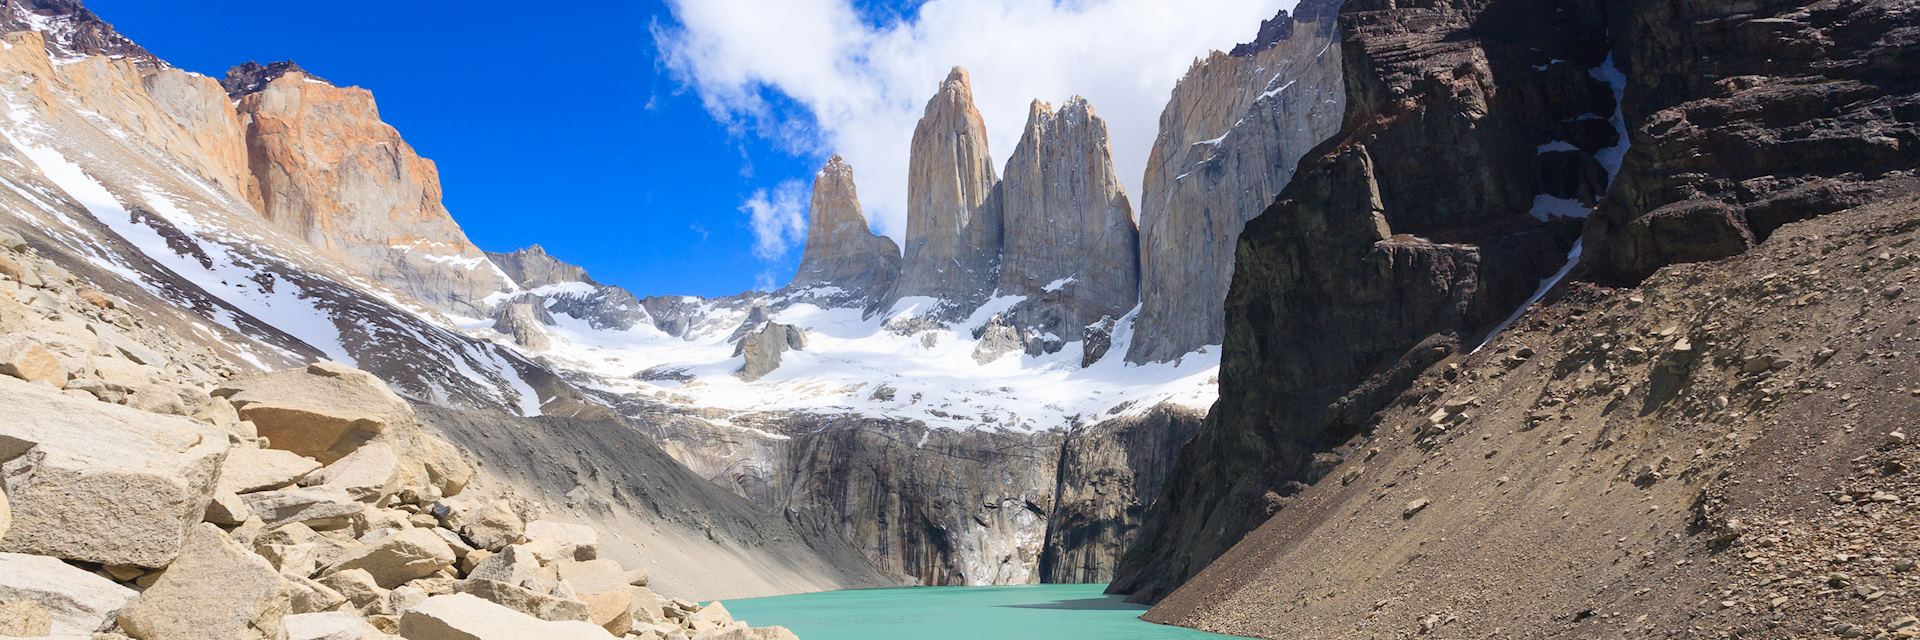 Hike to the base of the towers at Torres del Paine